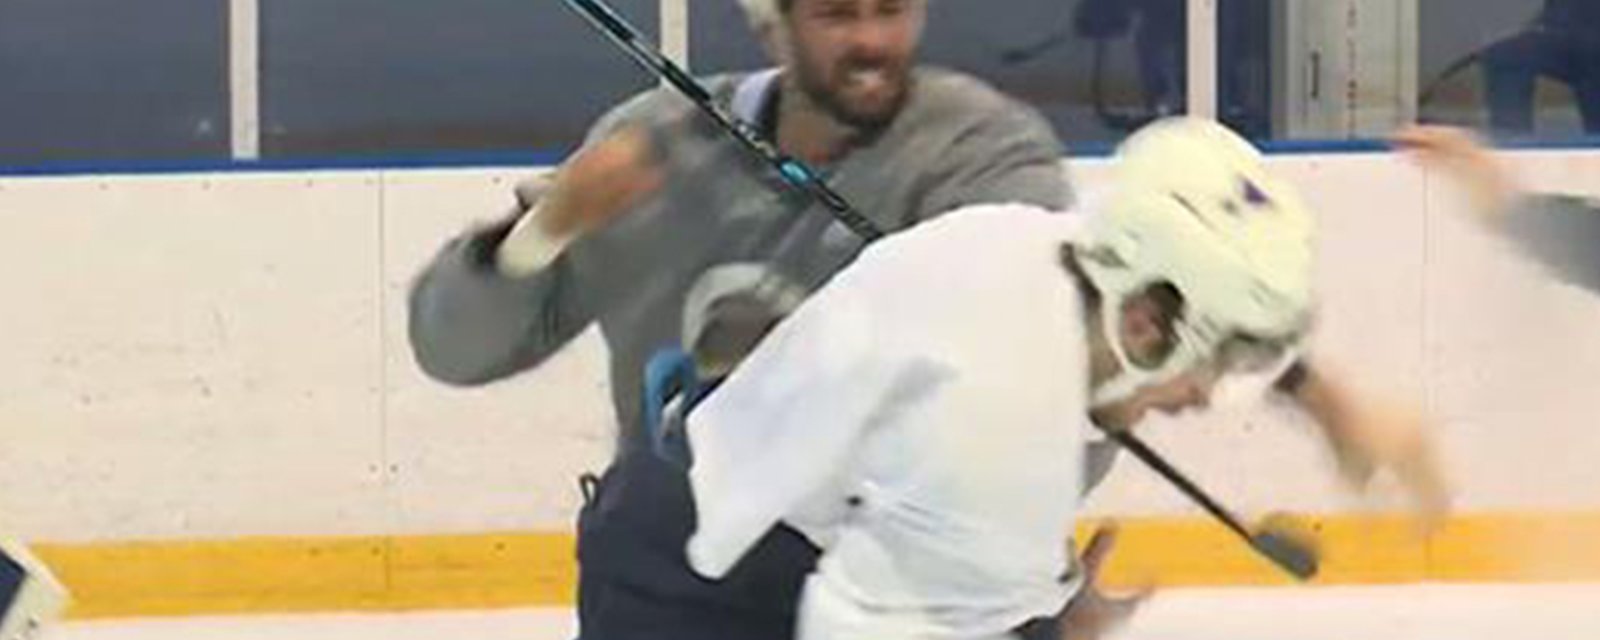 Breaking: Fight breaks out between NHL teammates during practice on Monday morning